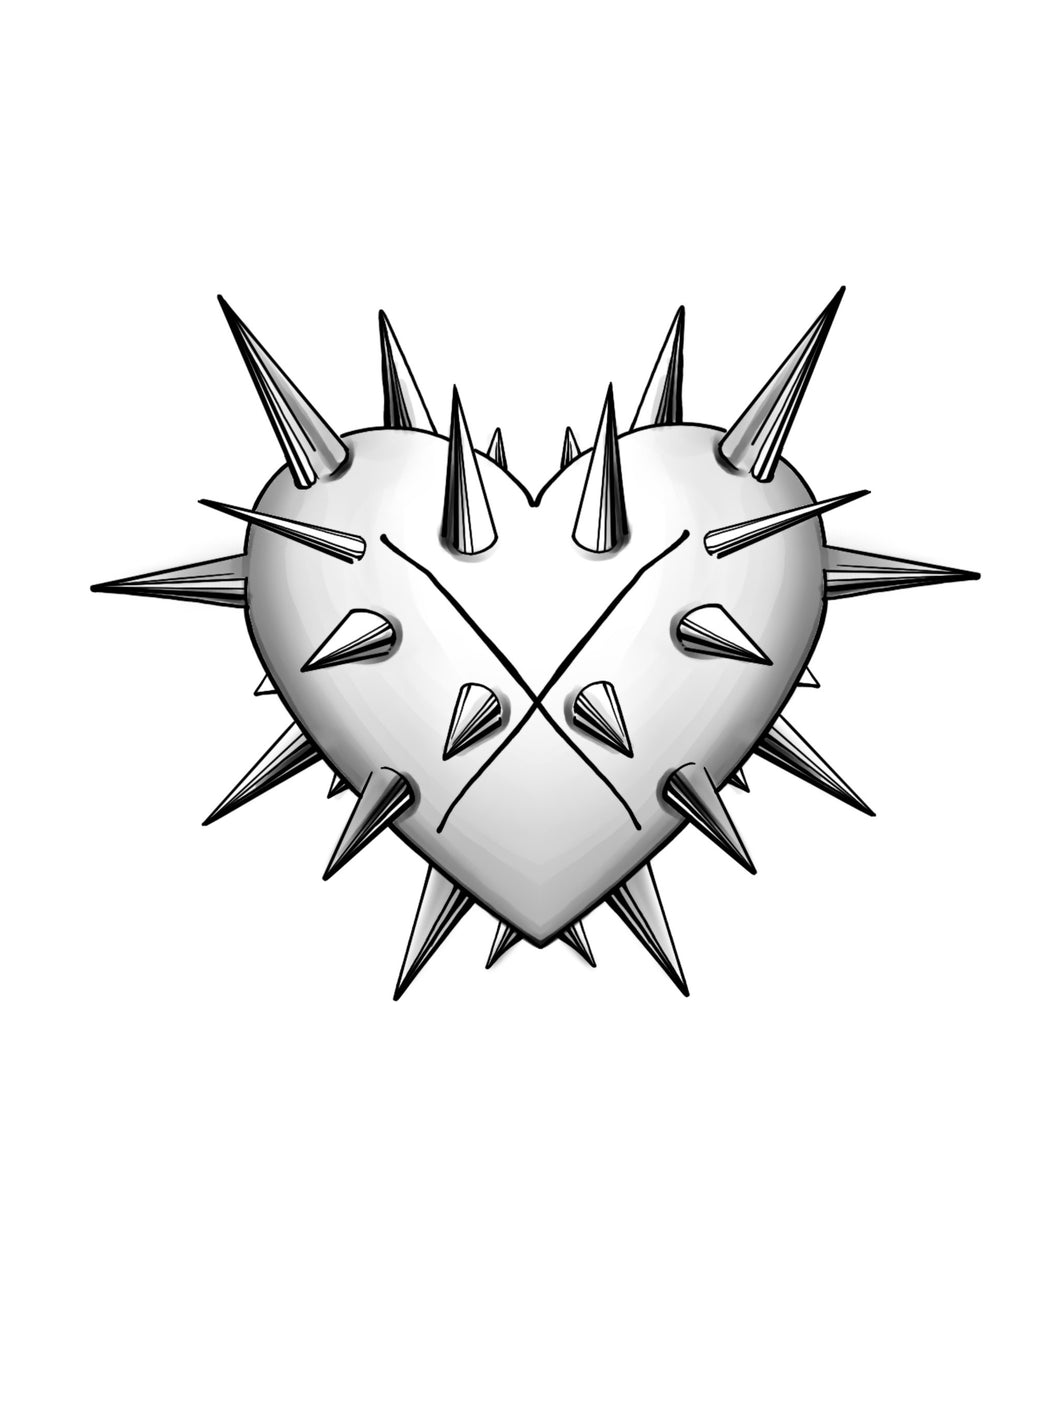 Spiked Heart by Cris